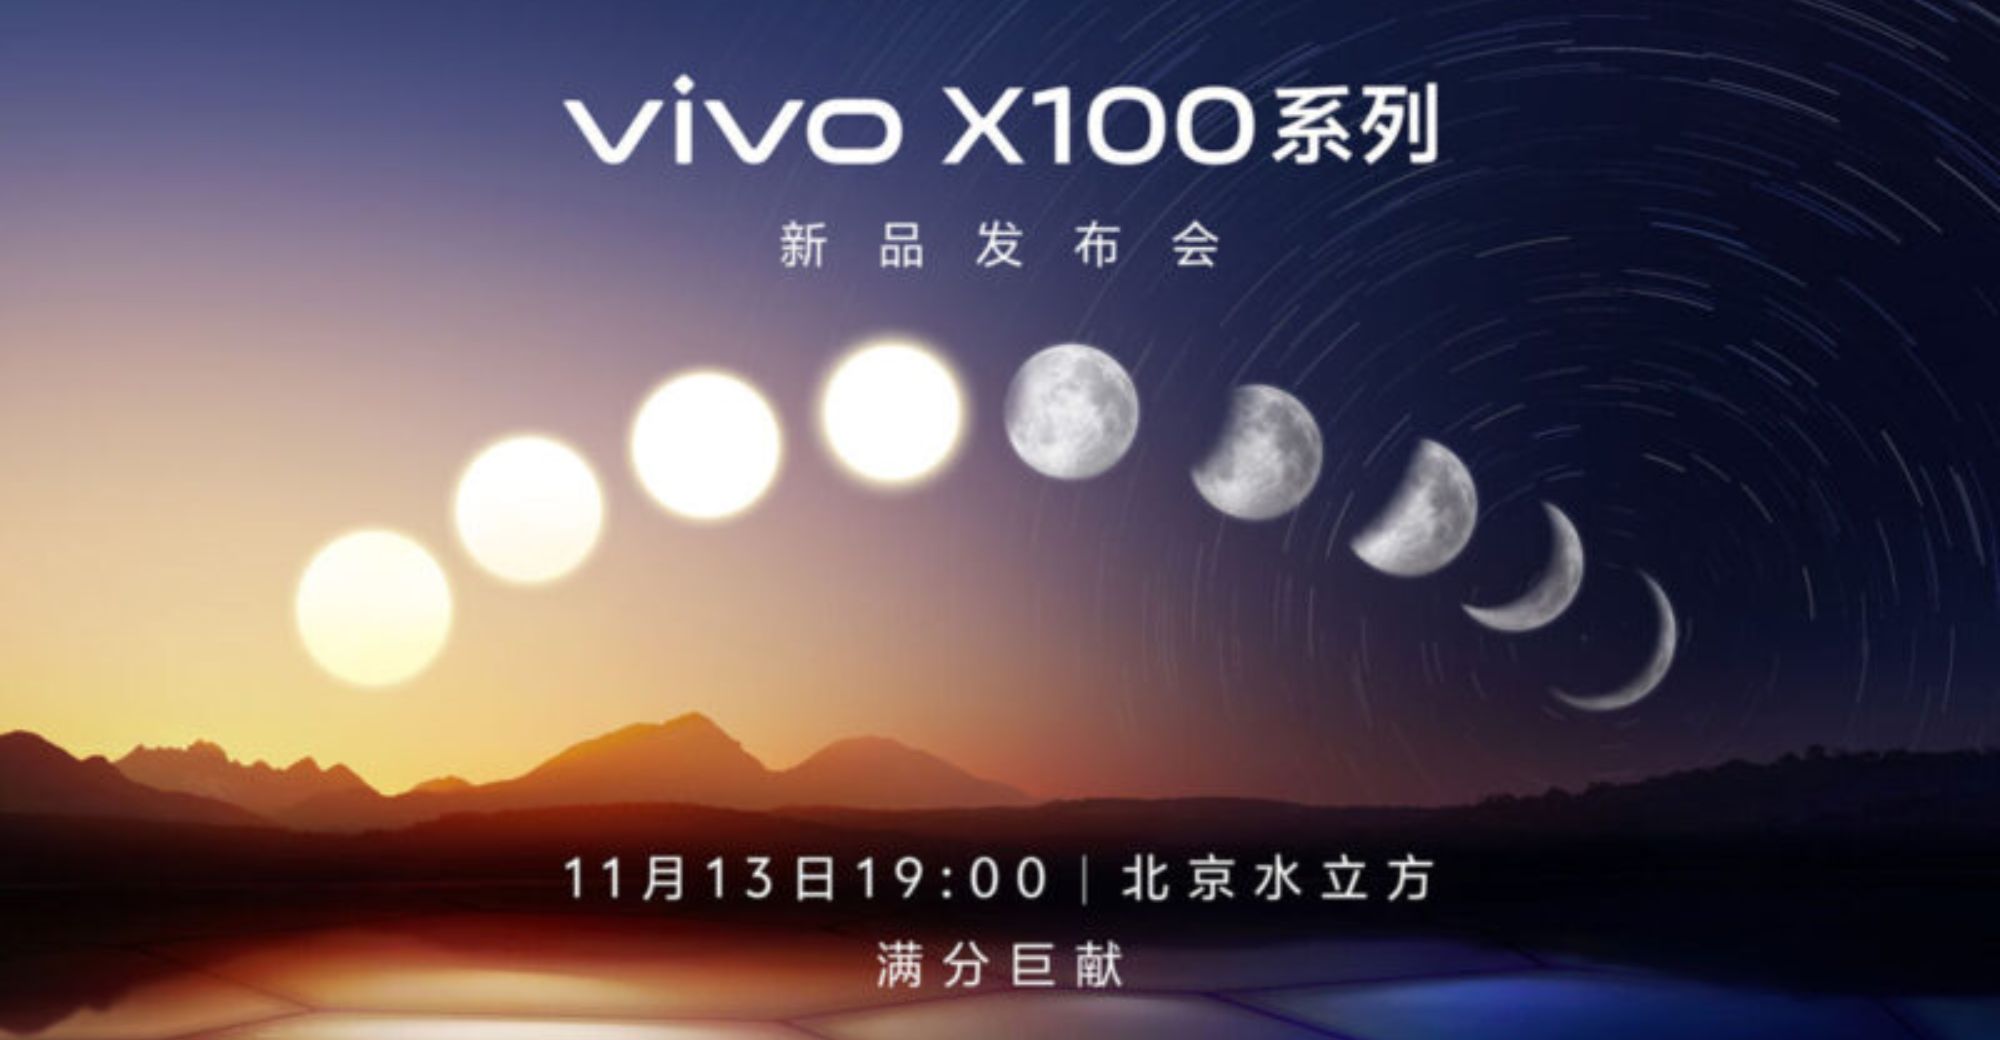 Vivo X100 Price Announces, Equipped with A Large Battery in Collaboration with CATL